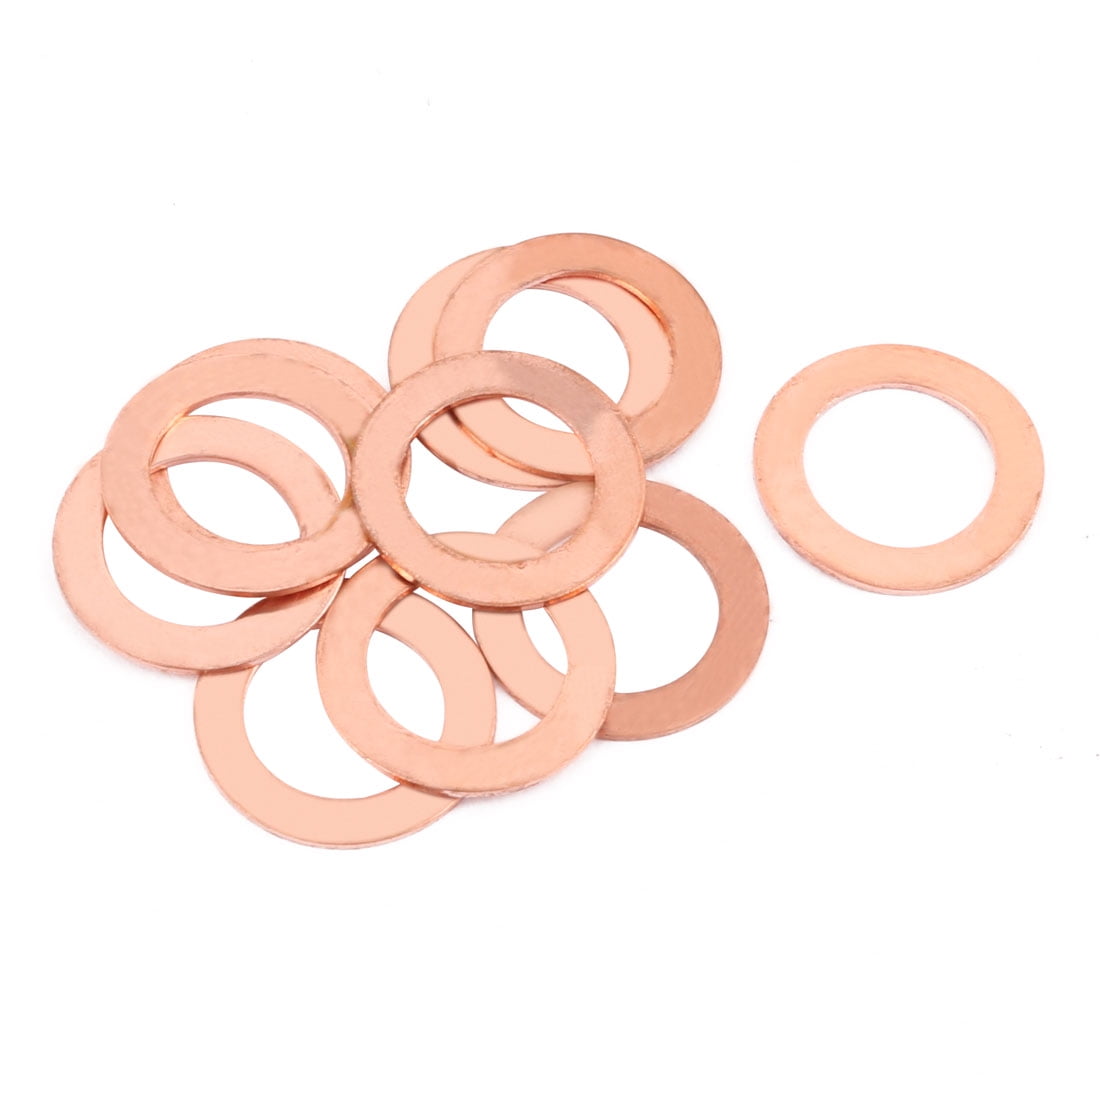 Copper Washers 10mm x 14mm x 1mm Pack of 50 